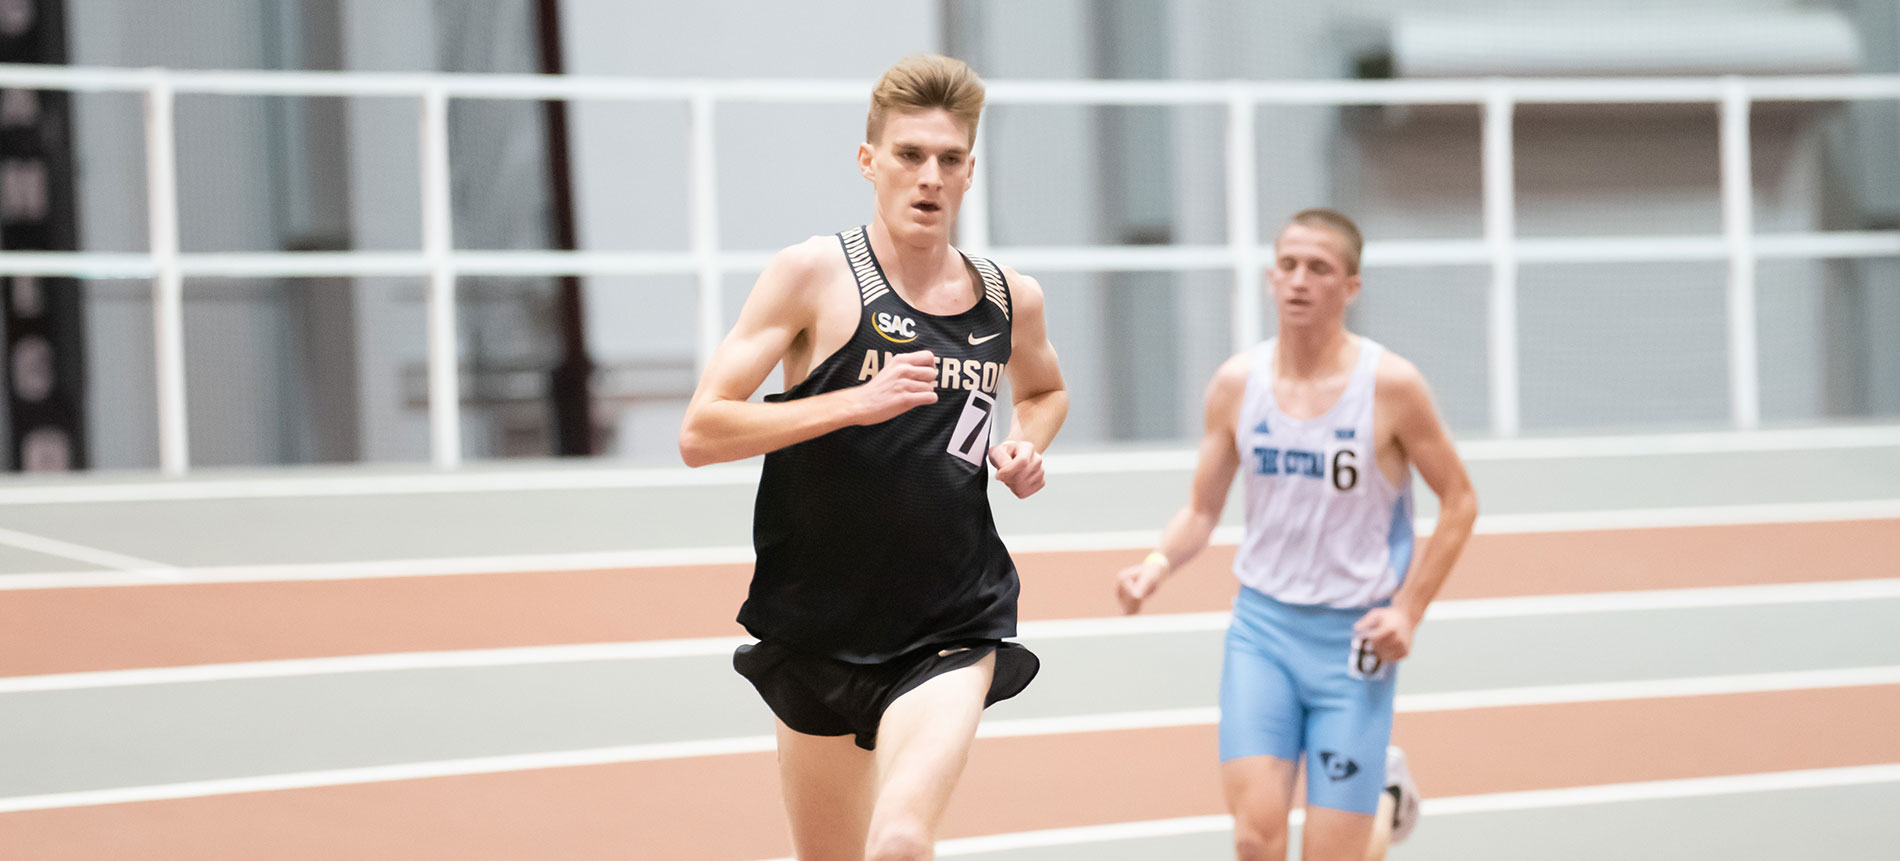 Quillen and Sutcliffe Set Personal-Best Times at Grand Valley State’s Big Meet